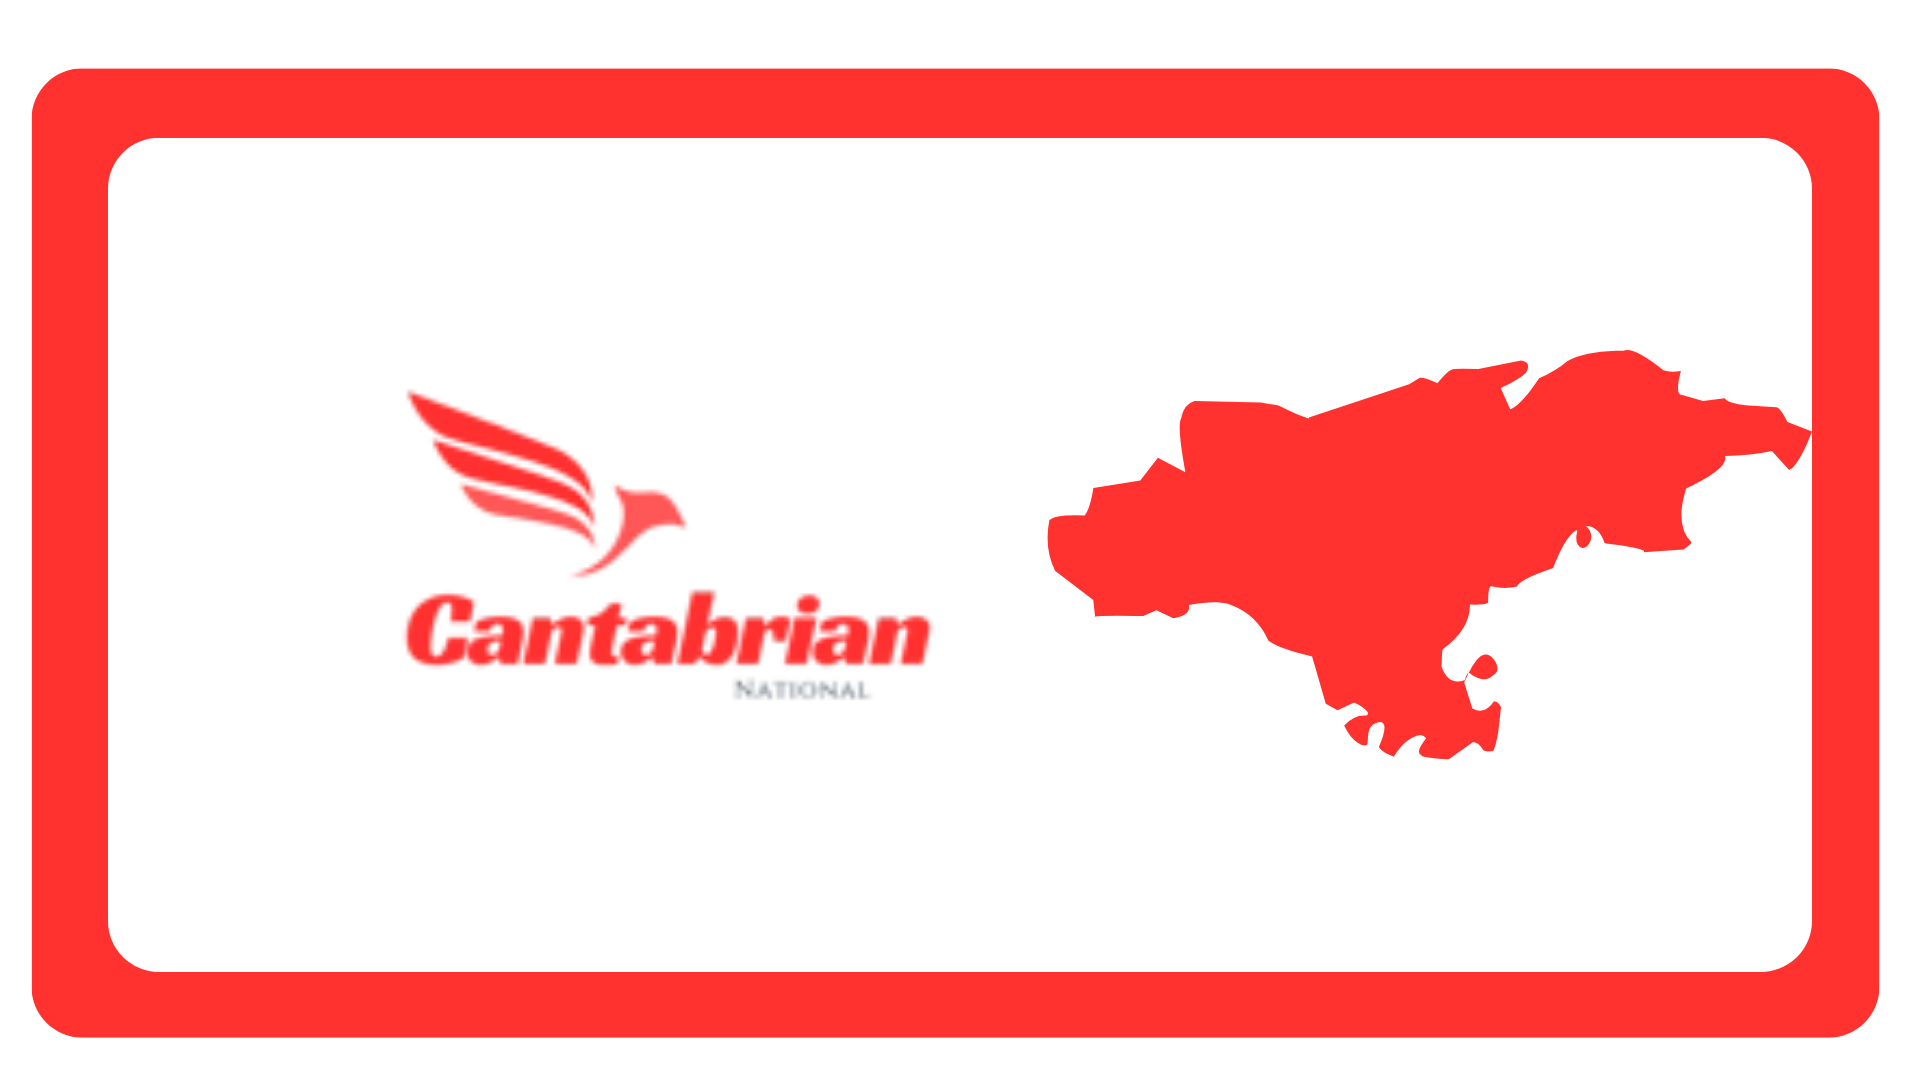 Meet the new airline startup, Cantabrian Airlines